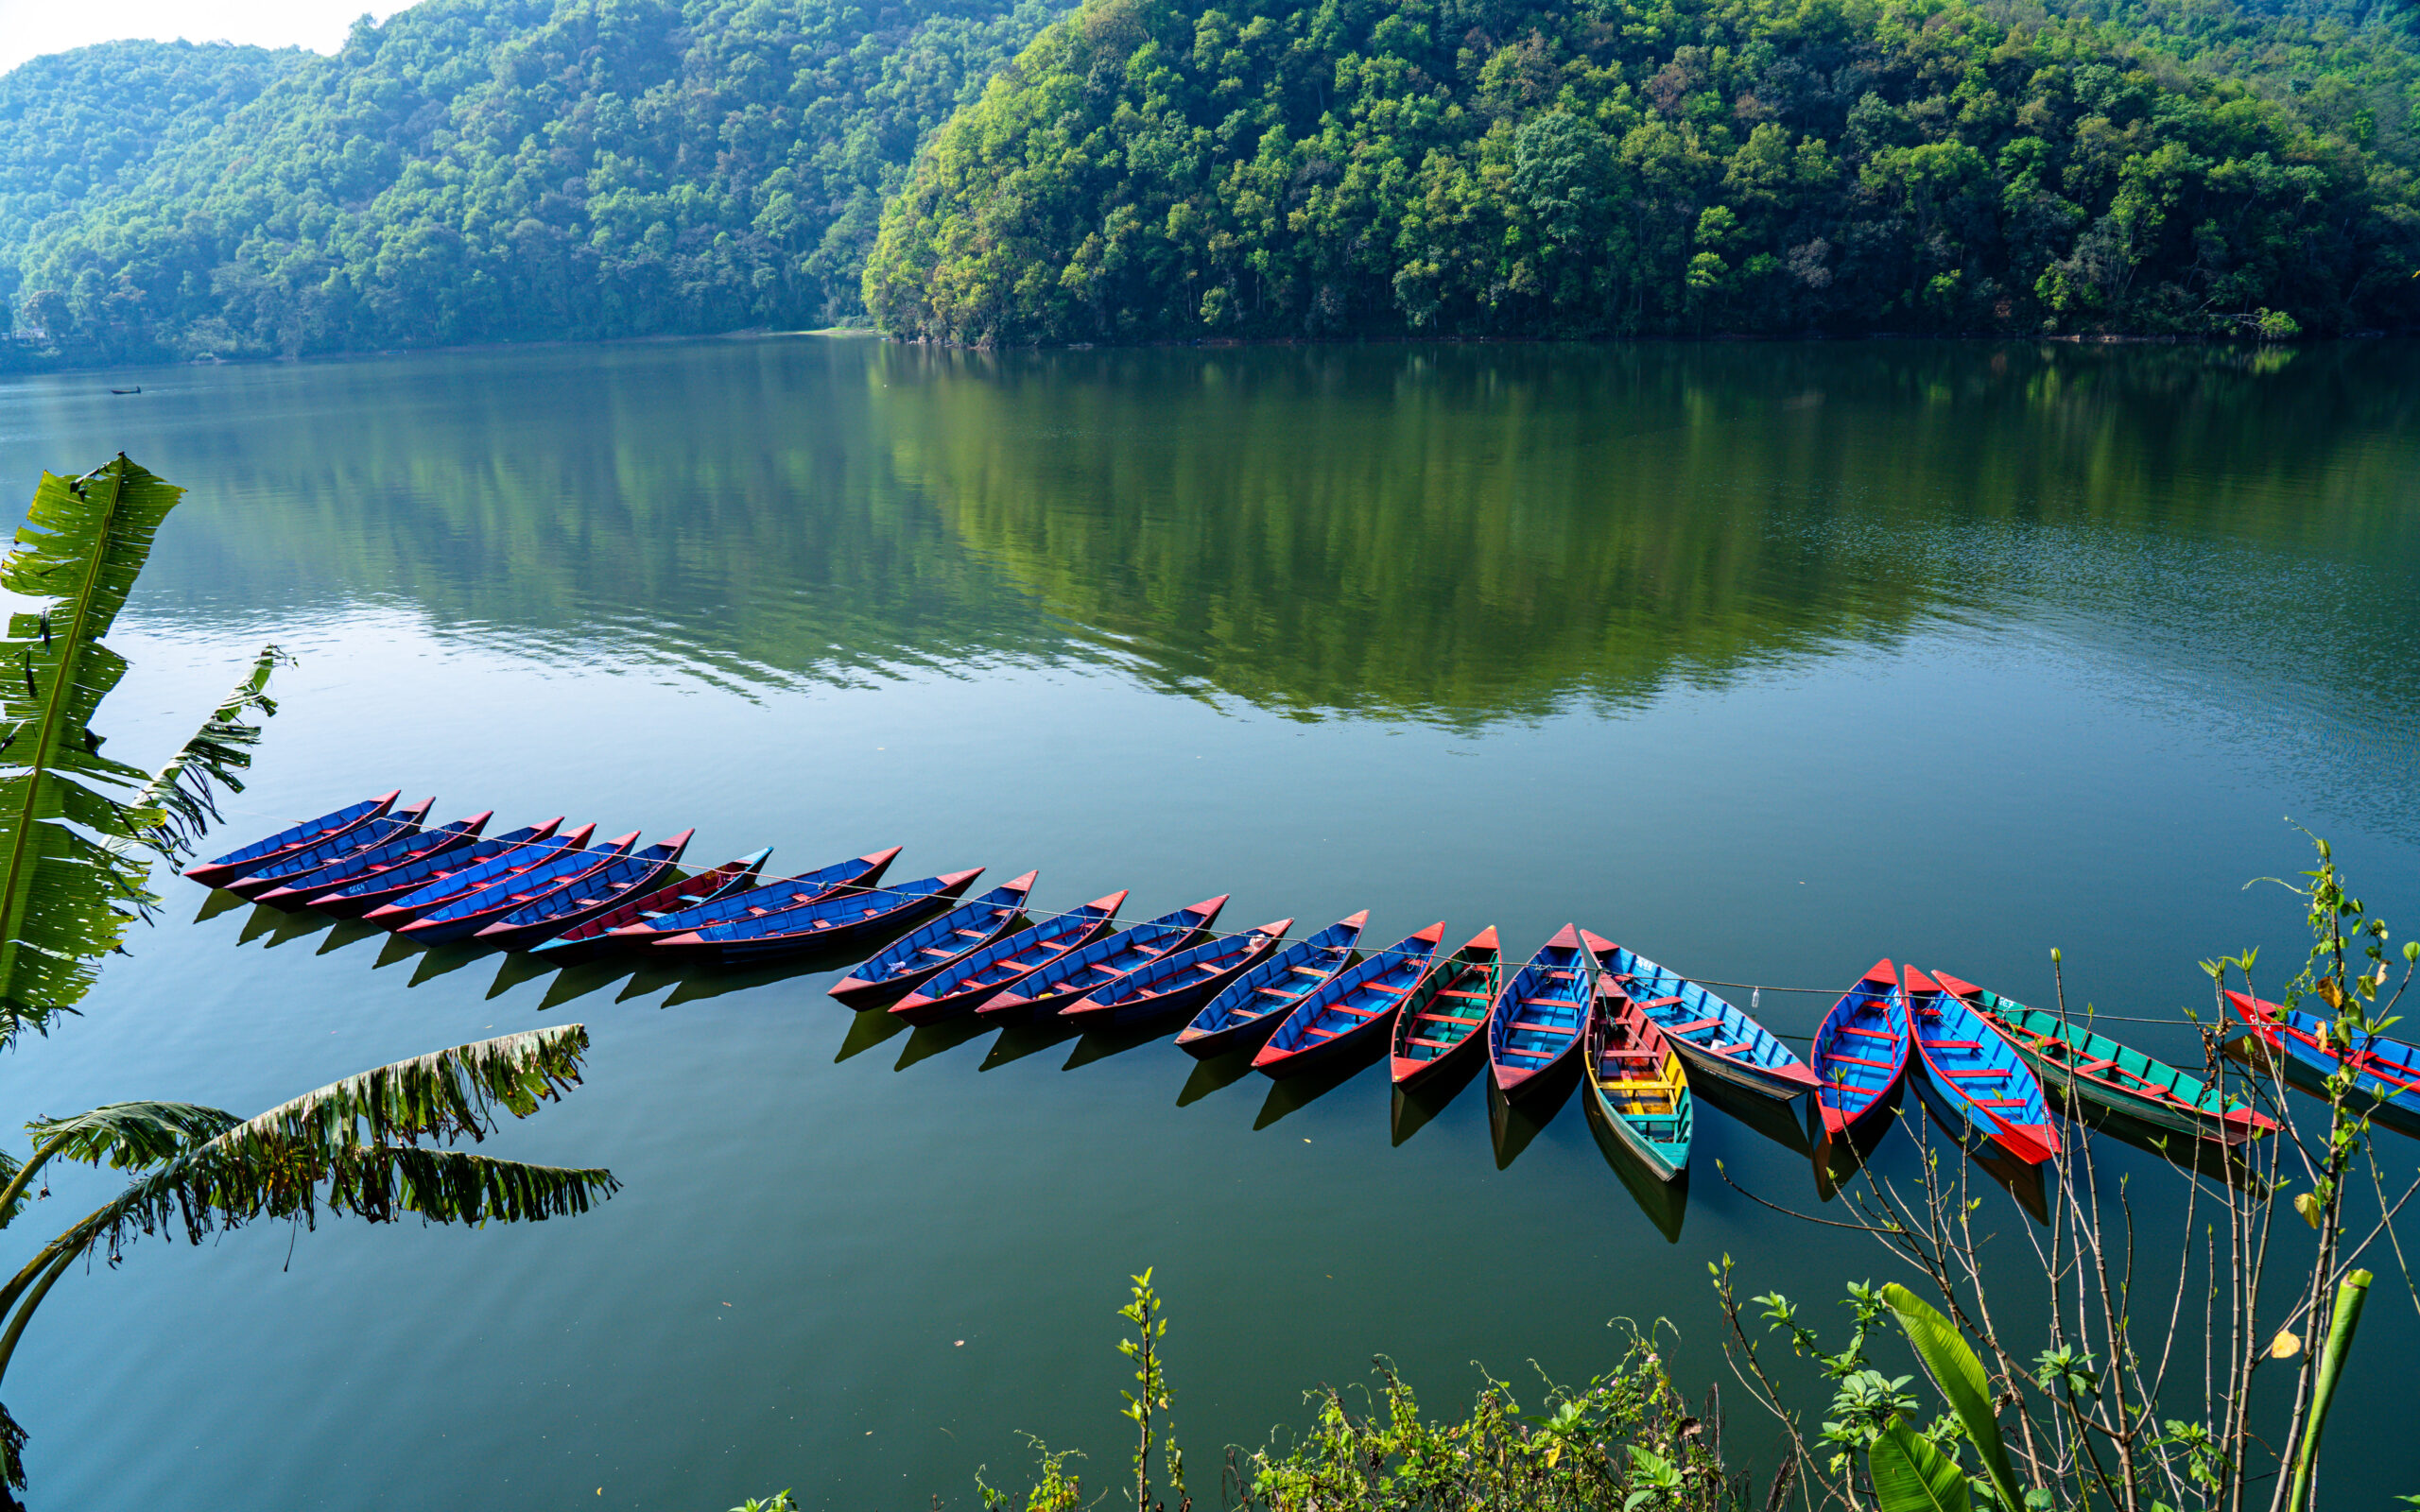 A group of canoes paddling in a body of water during the Kathmandu to Pokhara expedition.